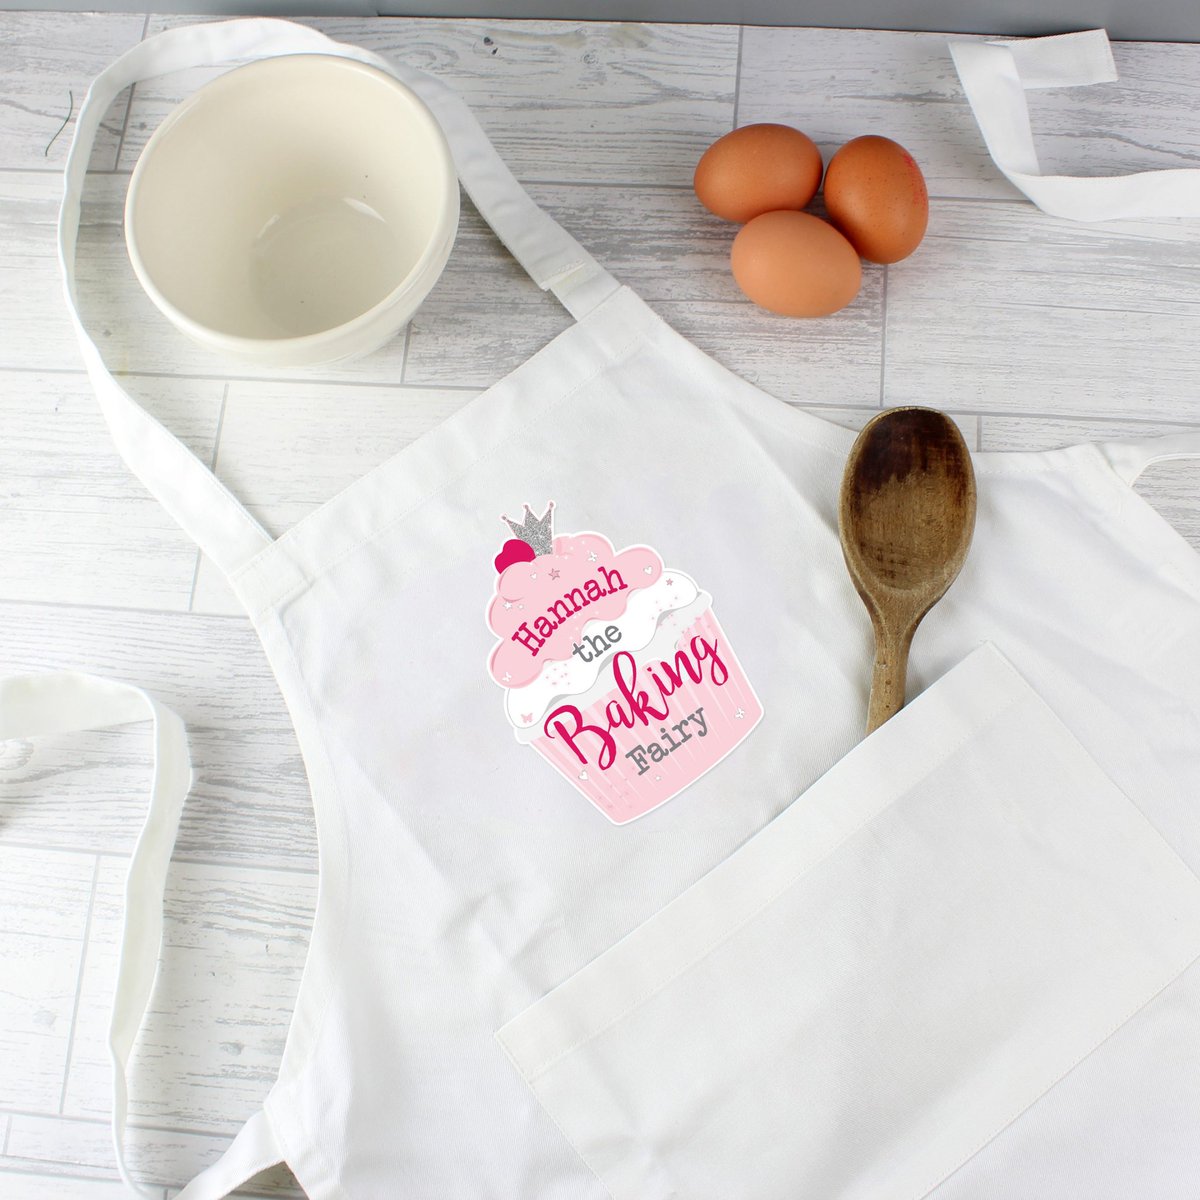 'Time to turn up the cuteness in the kitchen! Get your little one their own personalised apron from xclusivegifts.co.uk and save 10%
#MHHSBD #earlybizhour #UKGiftHour #personalisedgift #giftideas #apron #kidsgifts #MondayMorning #shopsmall #bizhour #womaninbizhour #essex